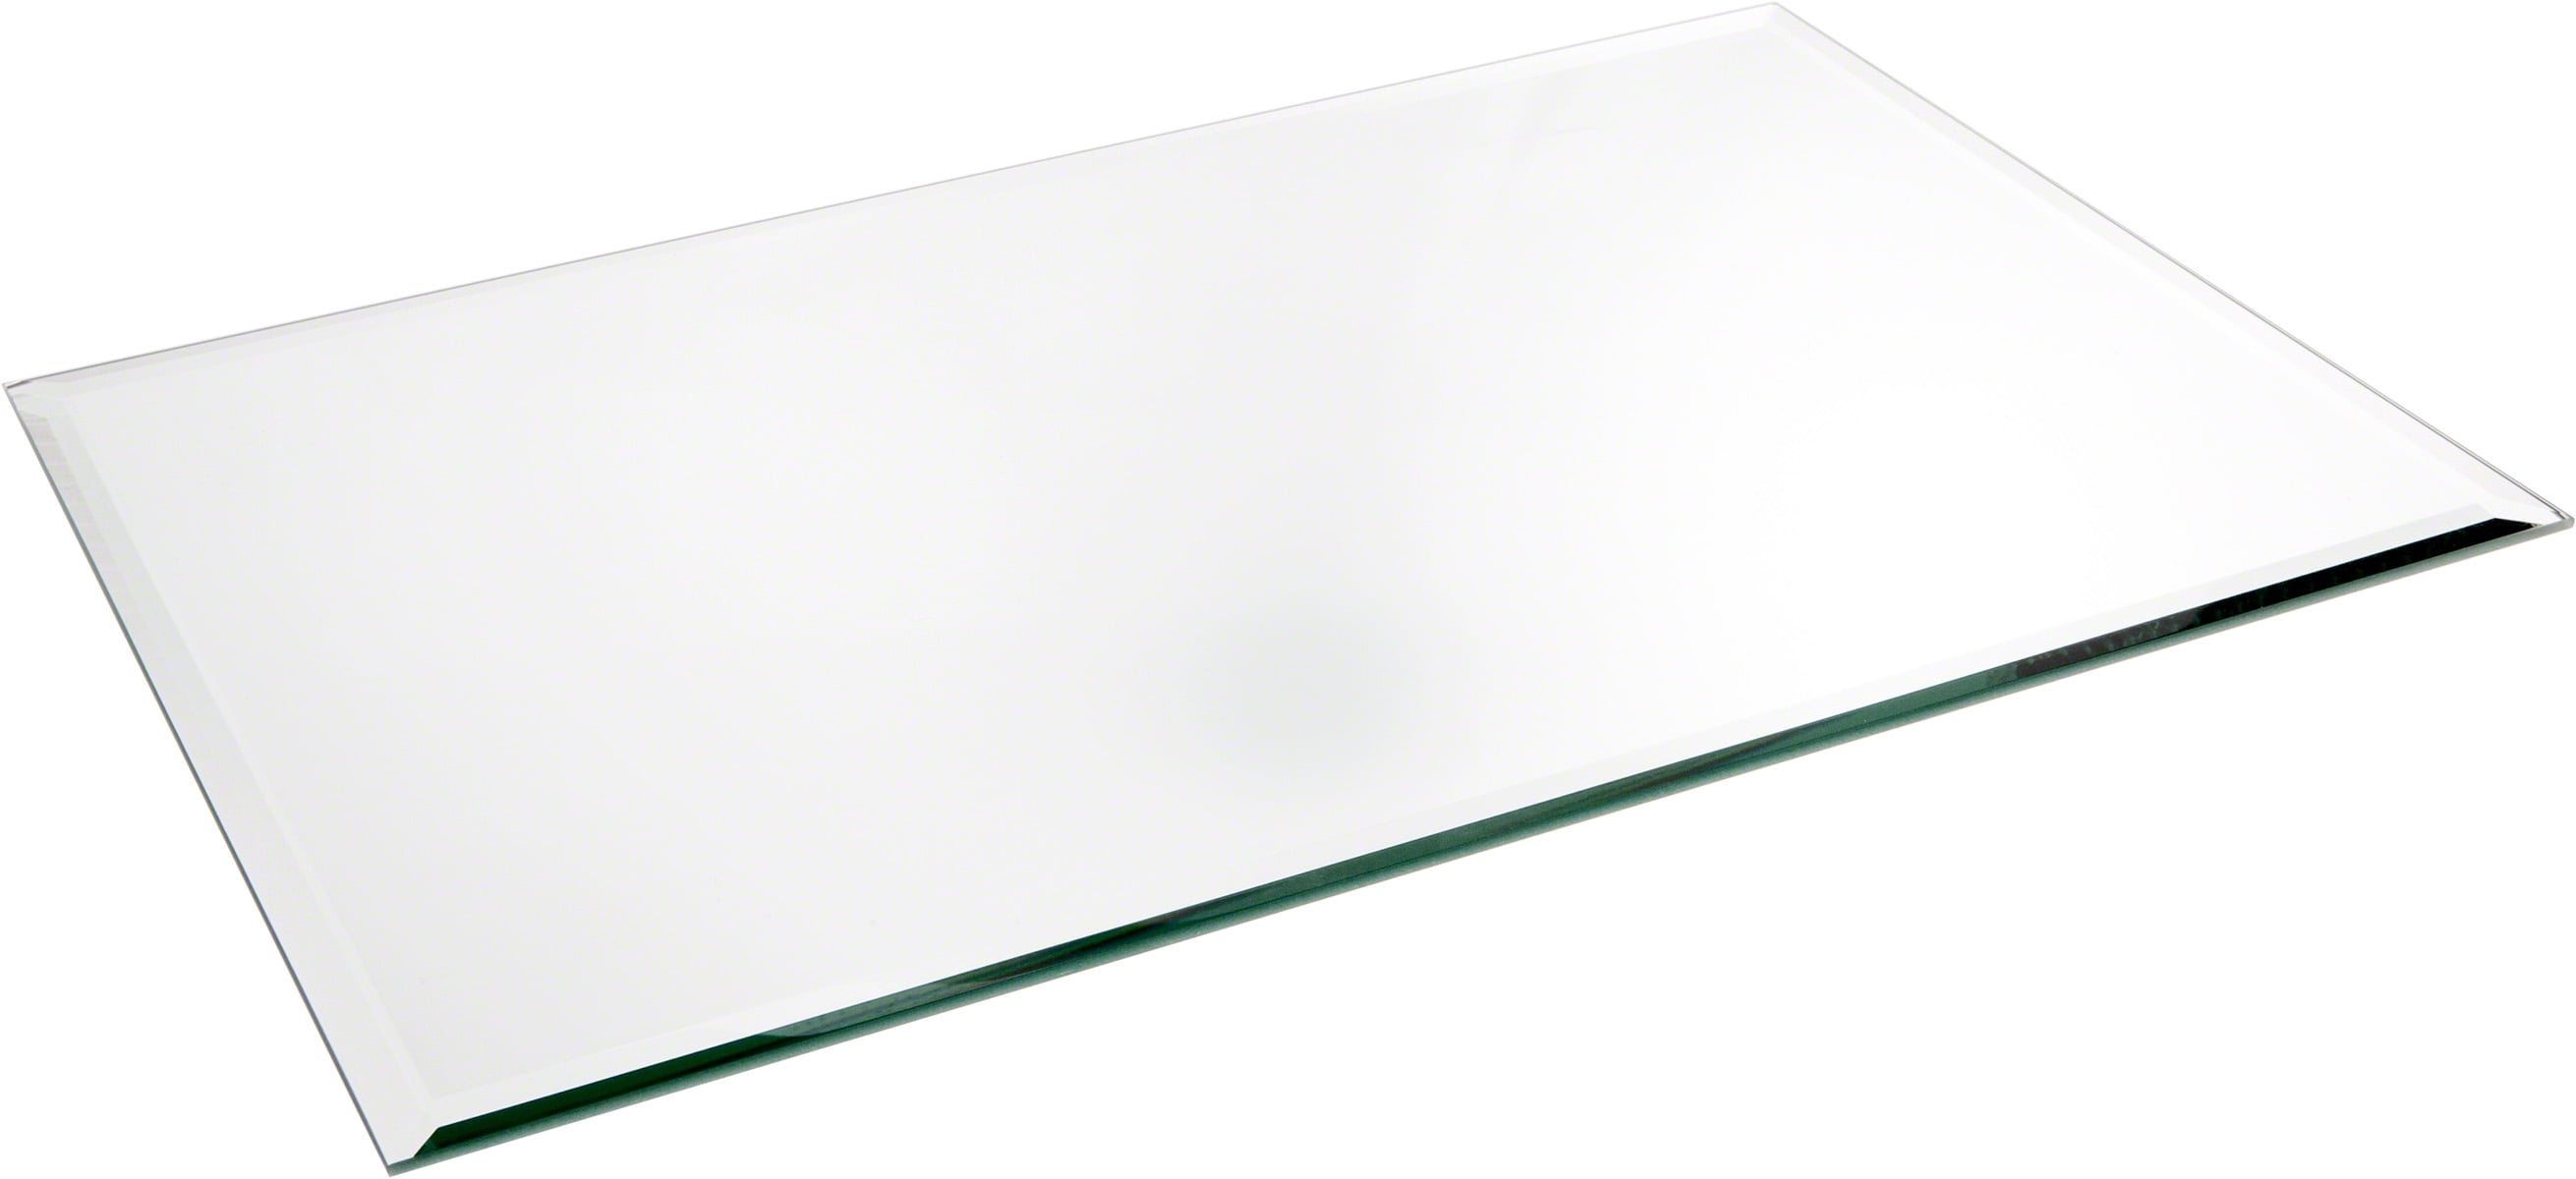 Plymor Square 3mm Beveled Glass Mirror 1 inch x 1 inch Pack of 144 